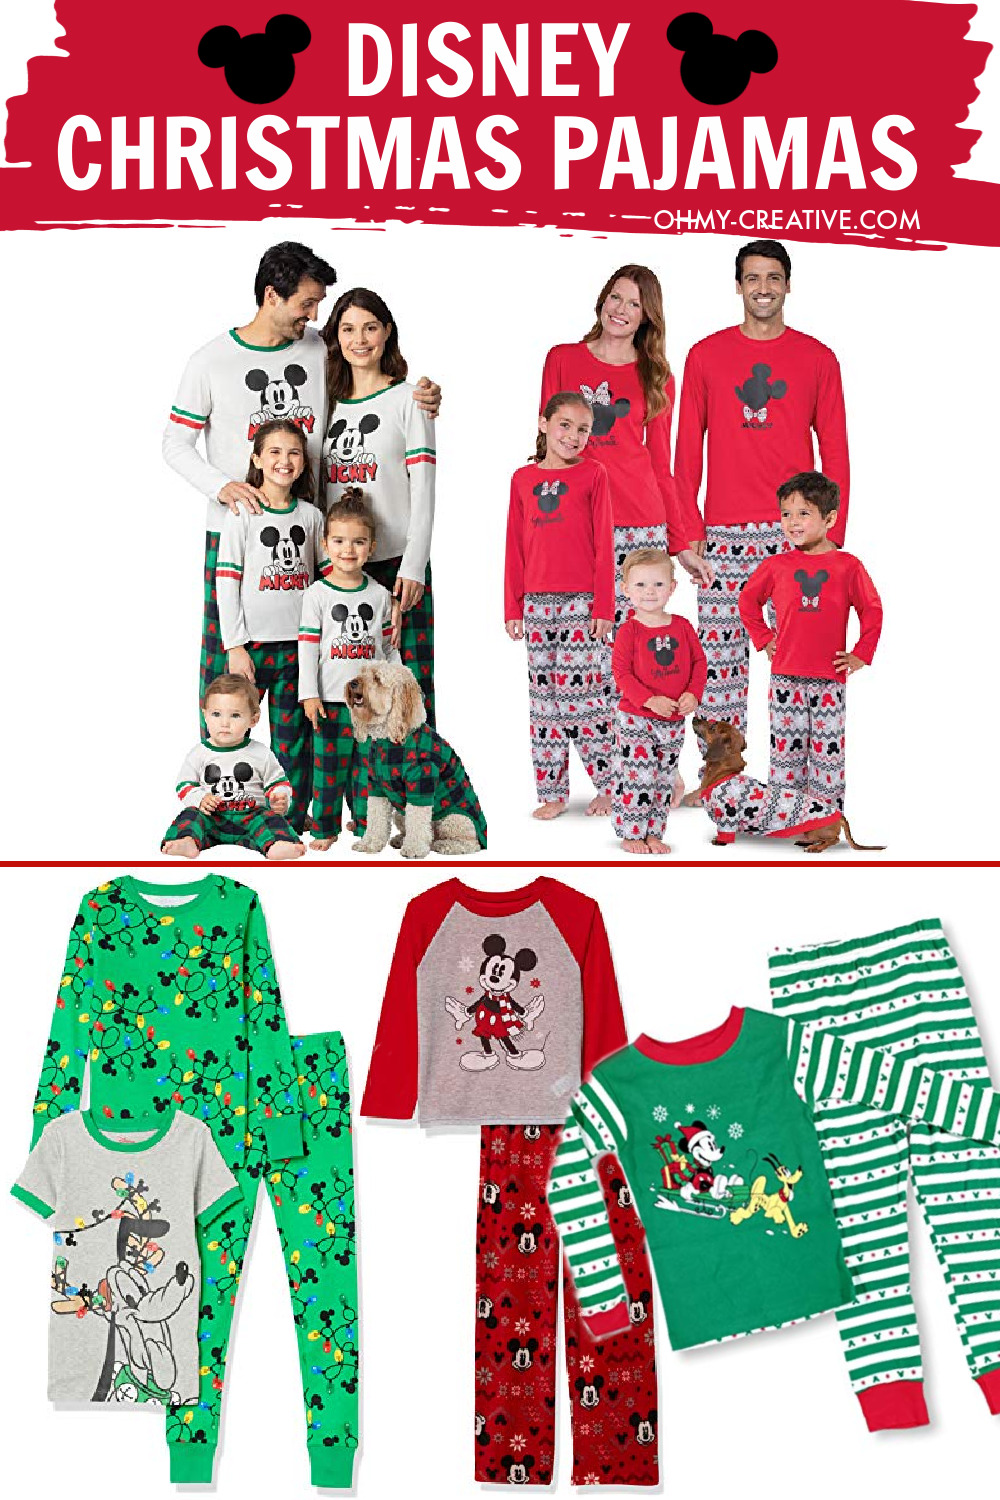 A collage of different Disney Christmas pajamas. Lots of styles to choose from.